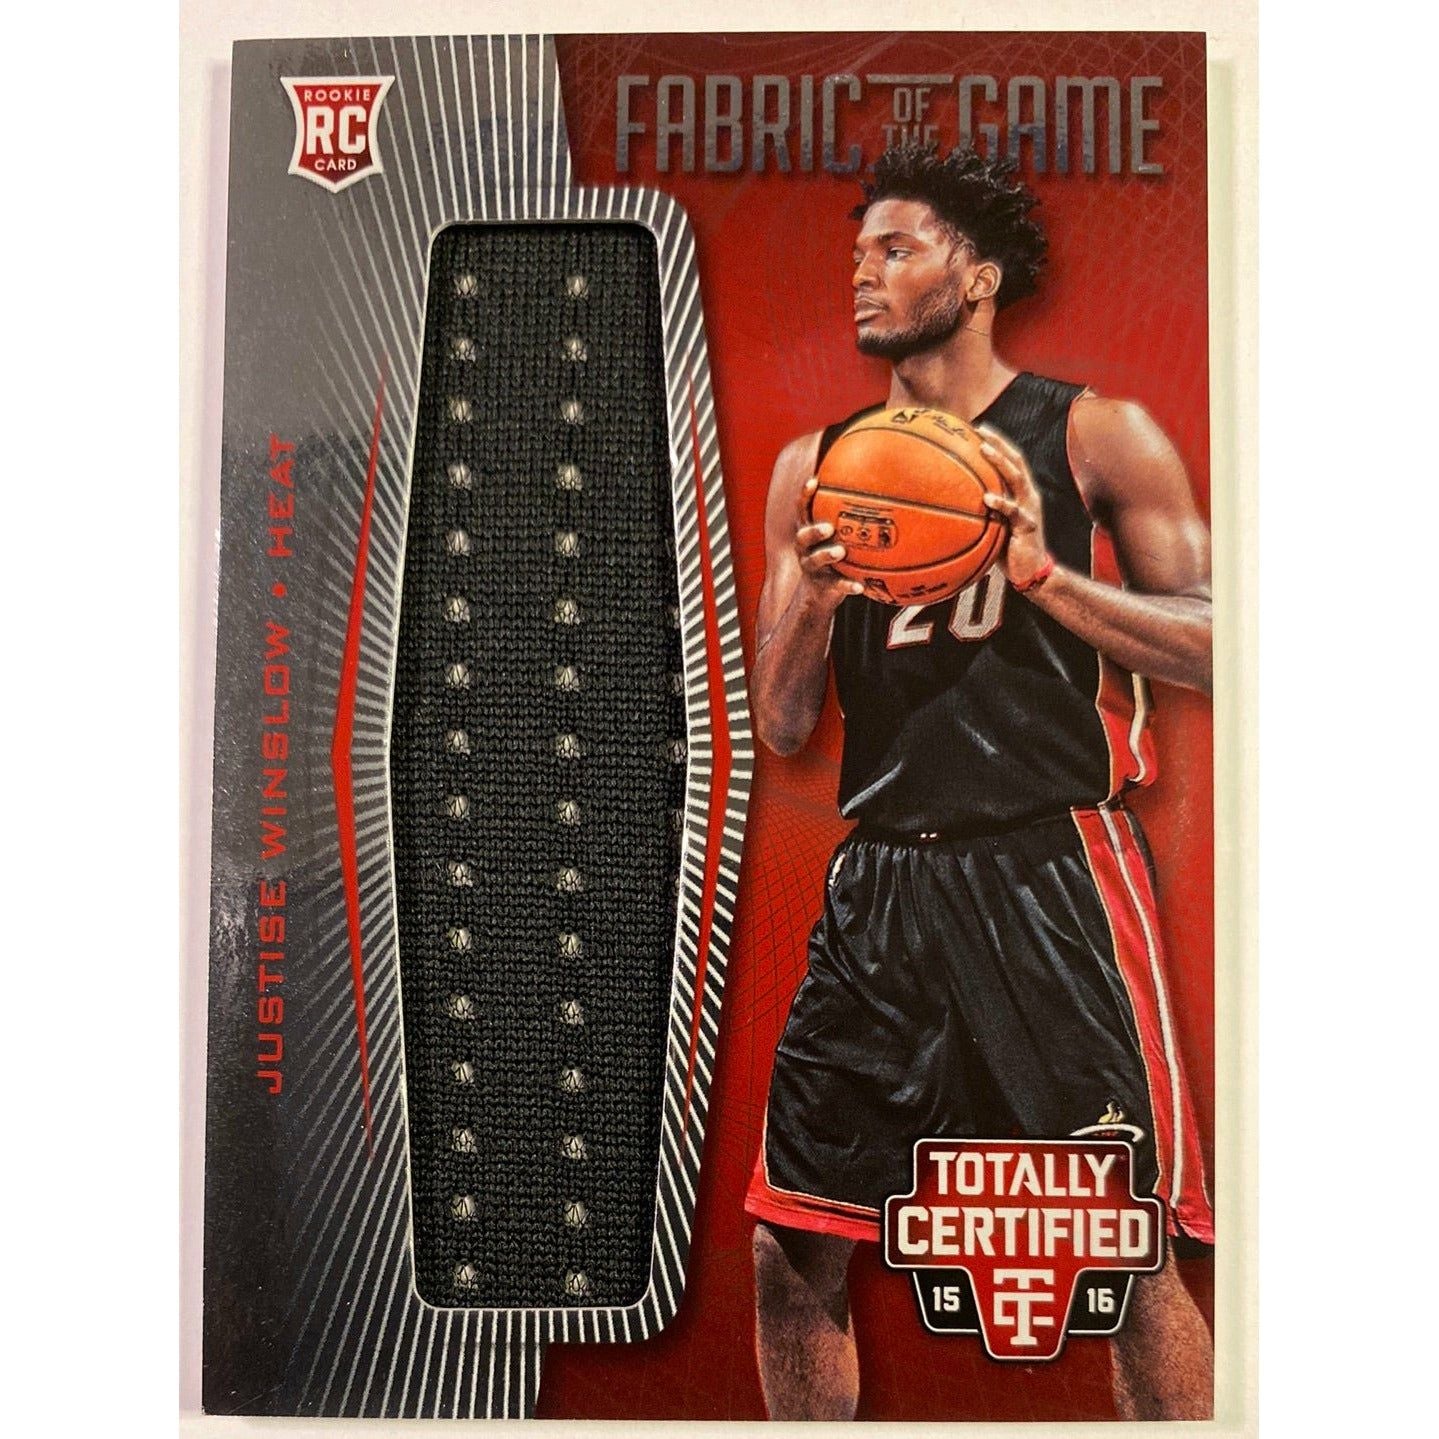  2015-16 Totally Certified Justise Winslow Fabric of the Game RC /199  Local Legends Cards & Collectibles